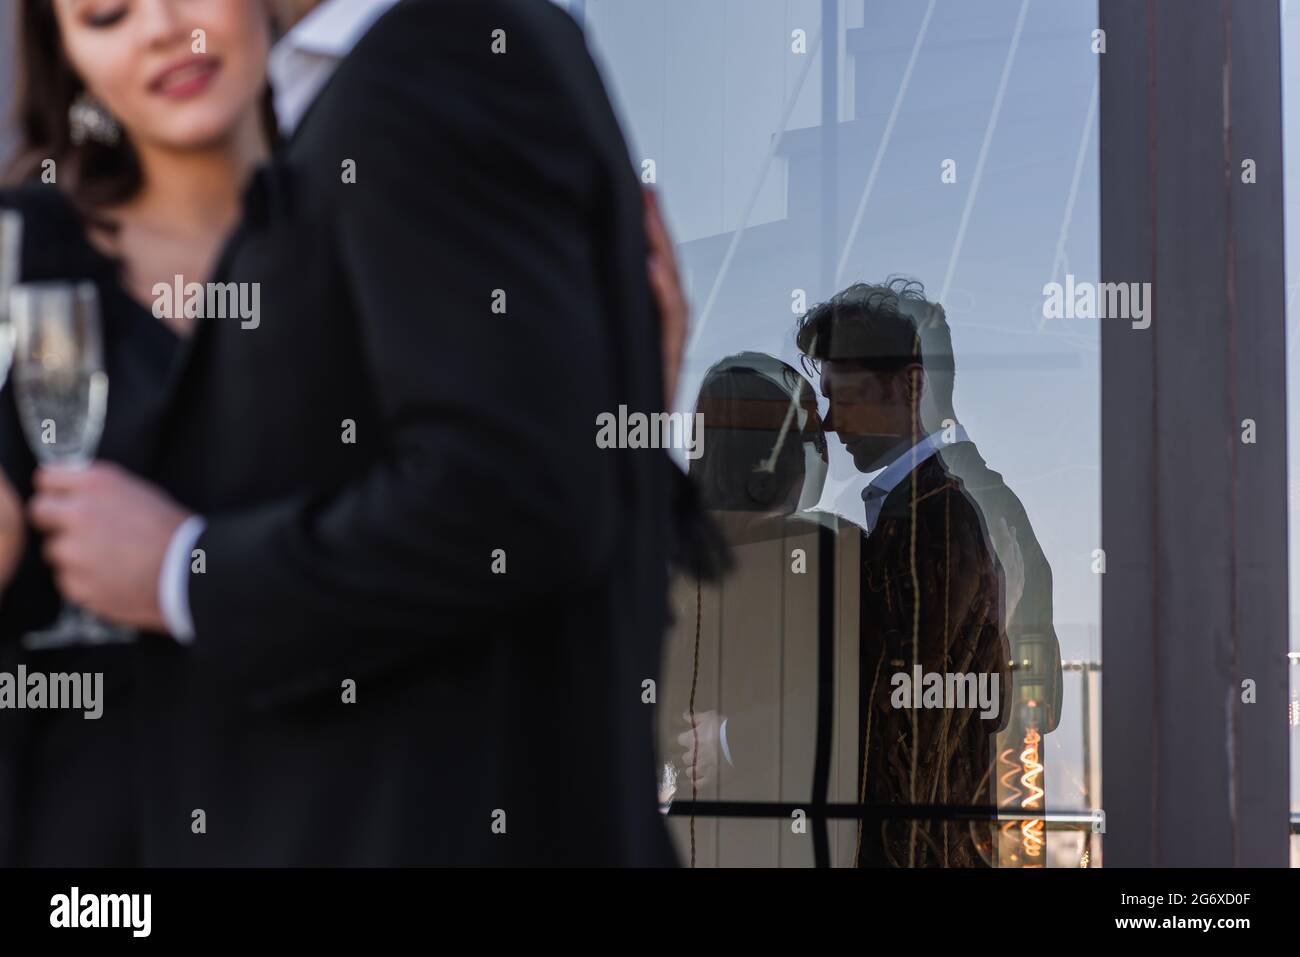 silhouette of loving couple in glass of window with blurred foreground Stock Photo